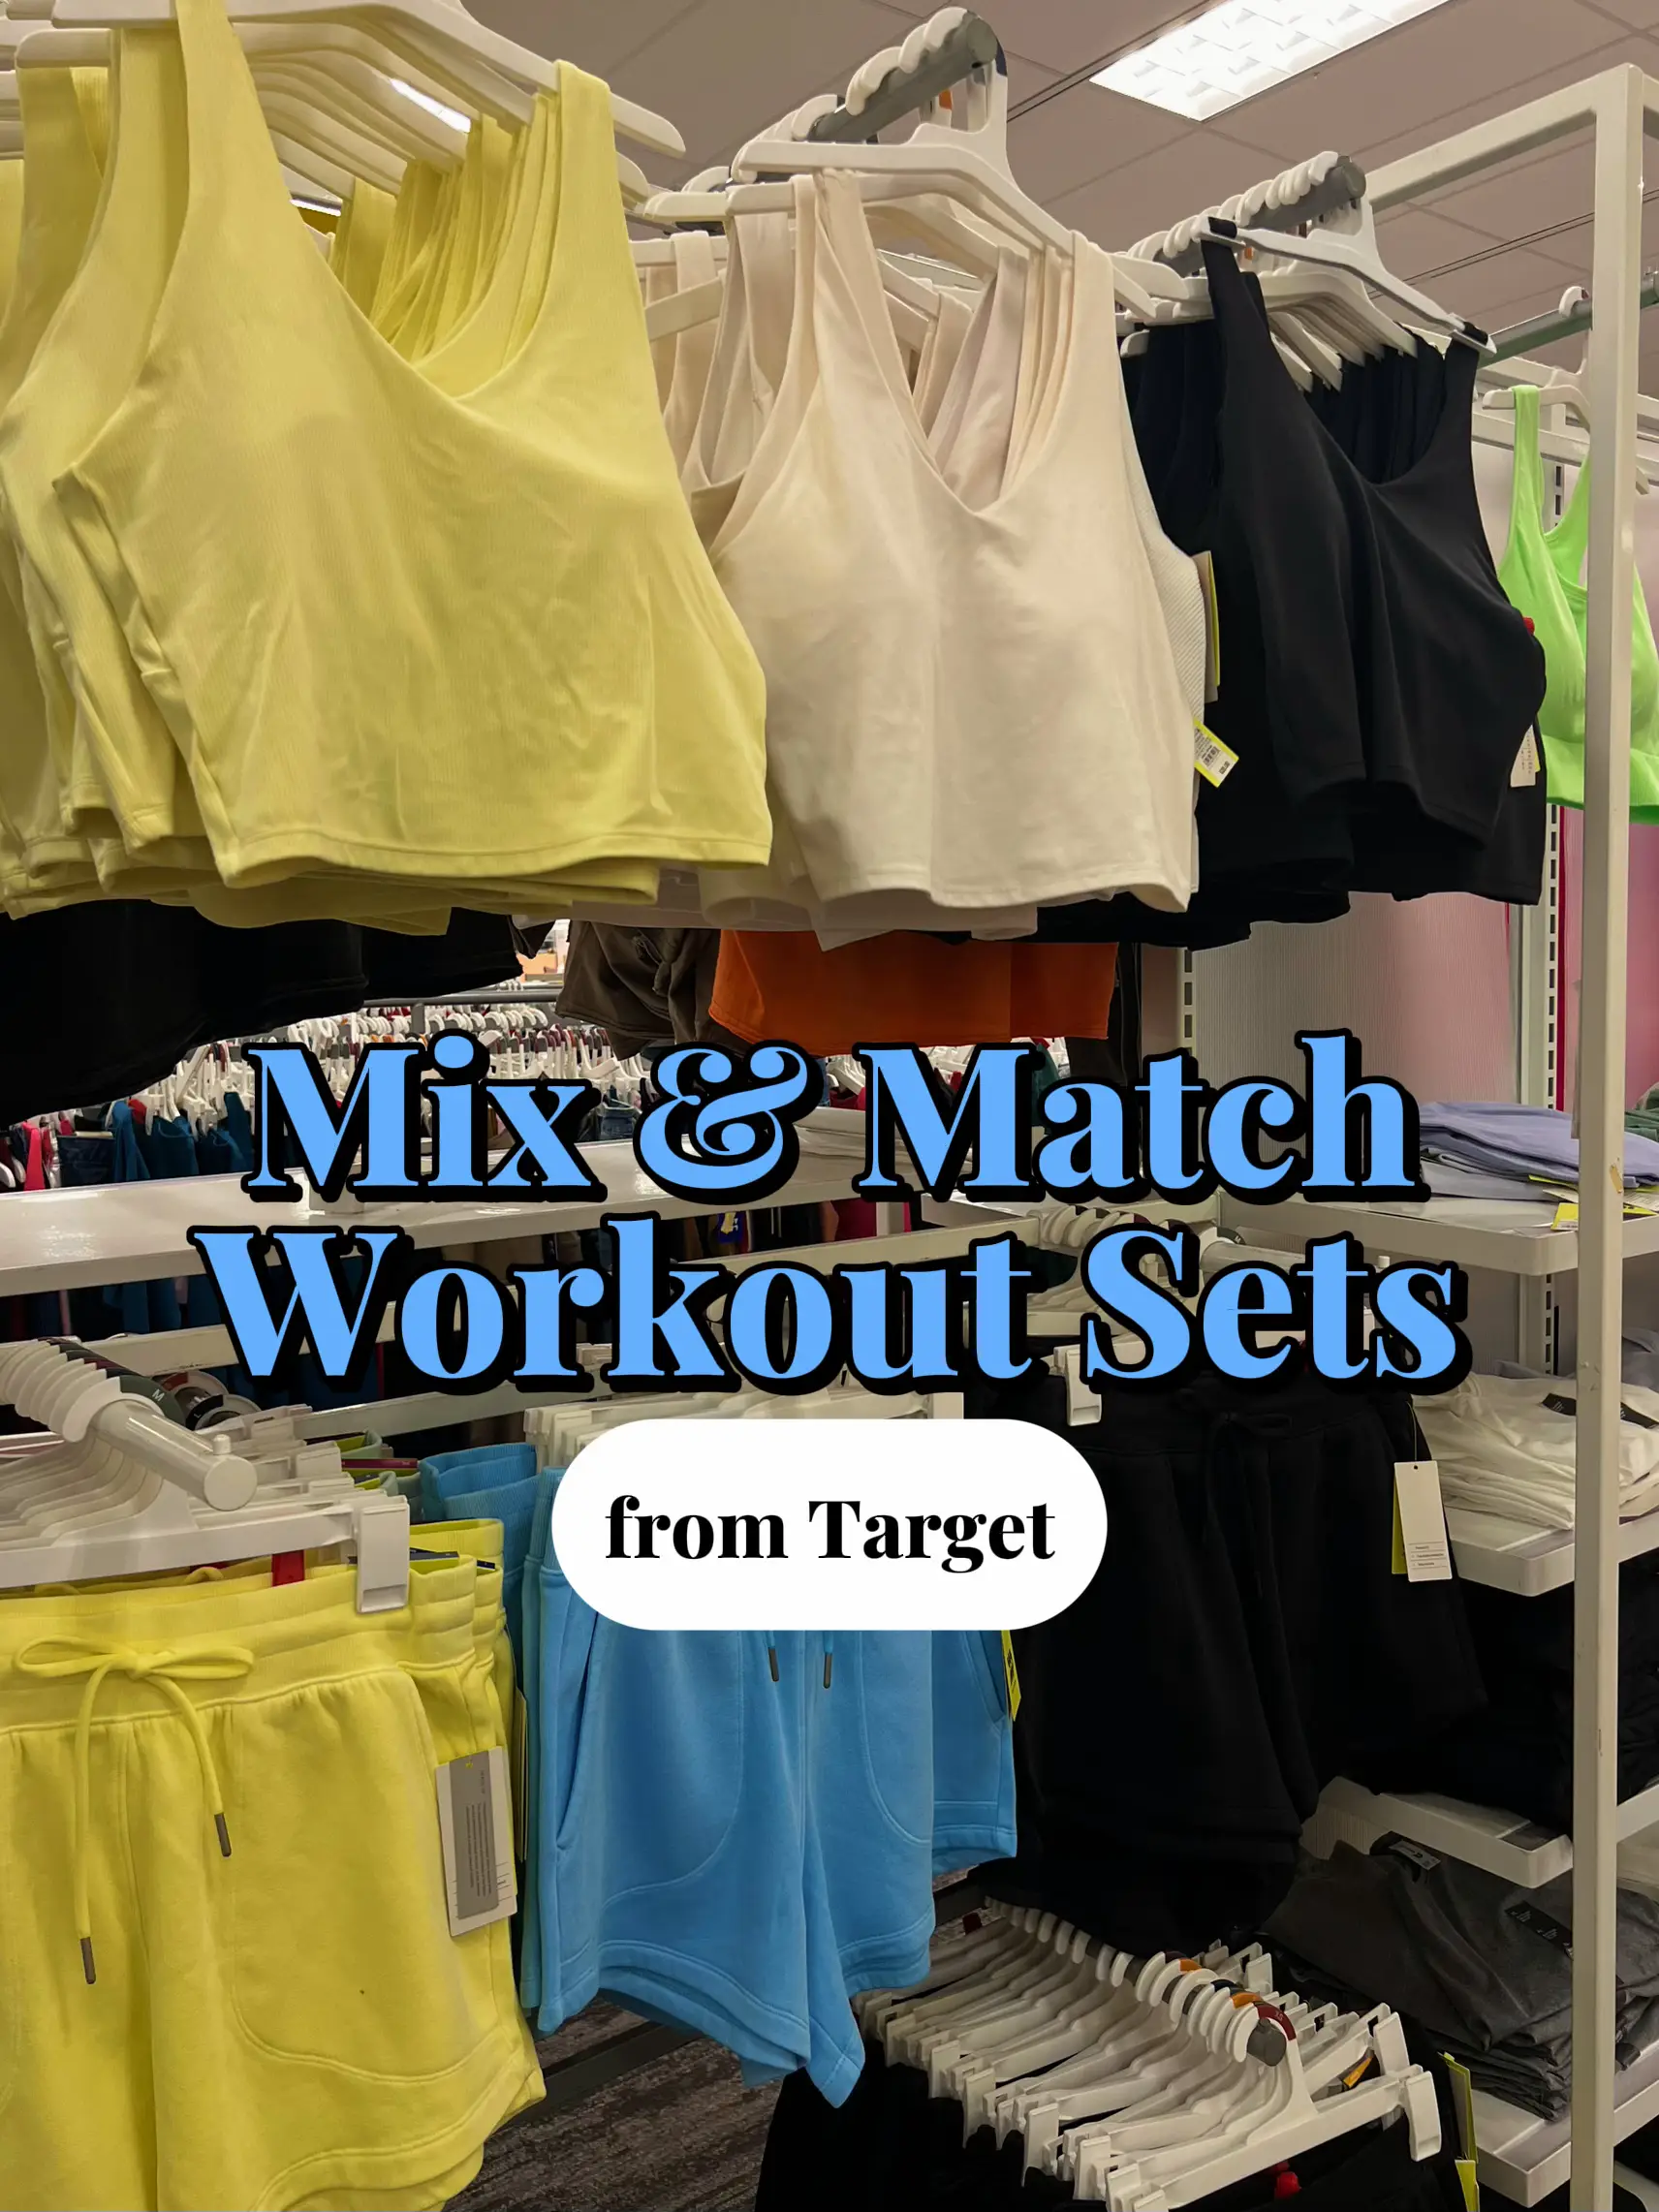 Cute Workout Sets from Target for Motivation